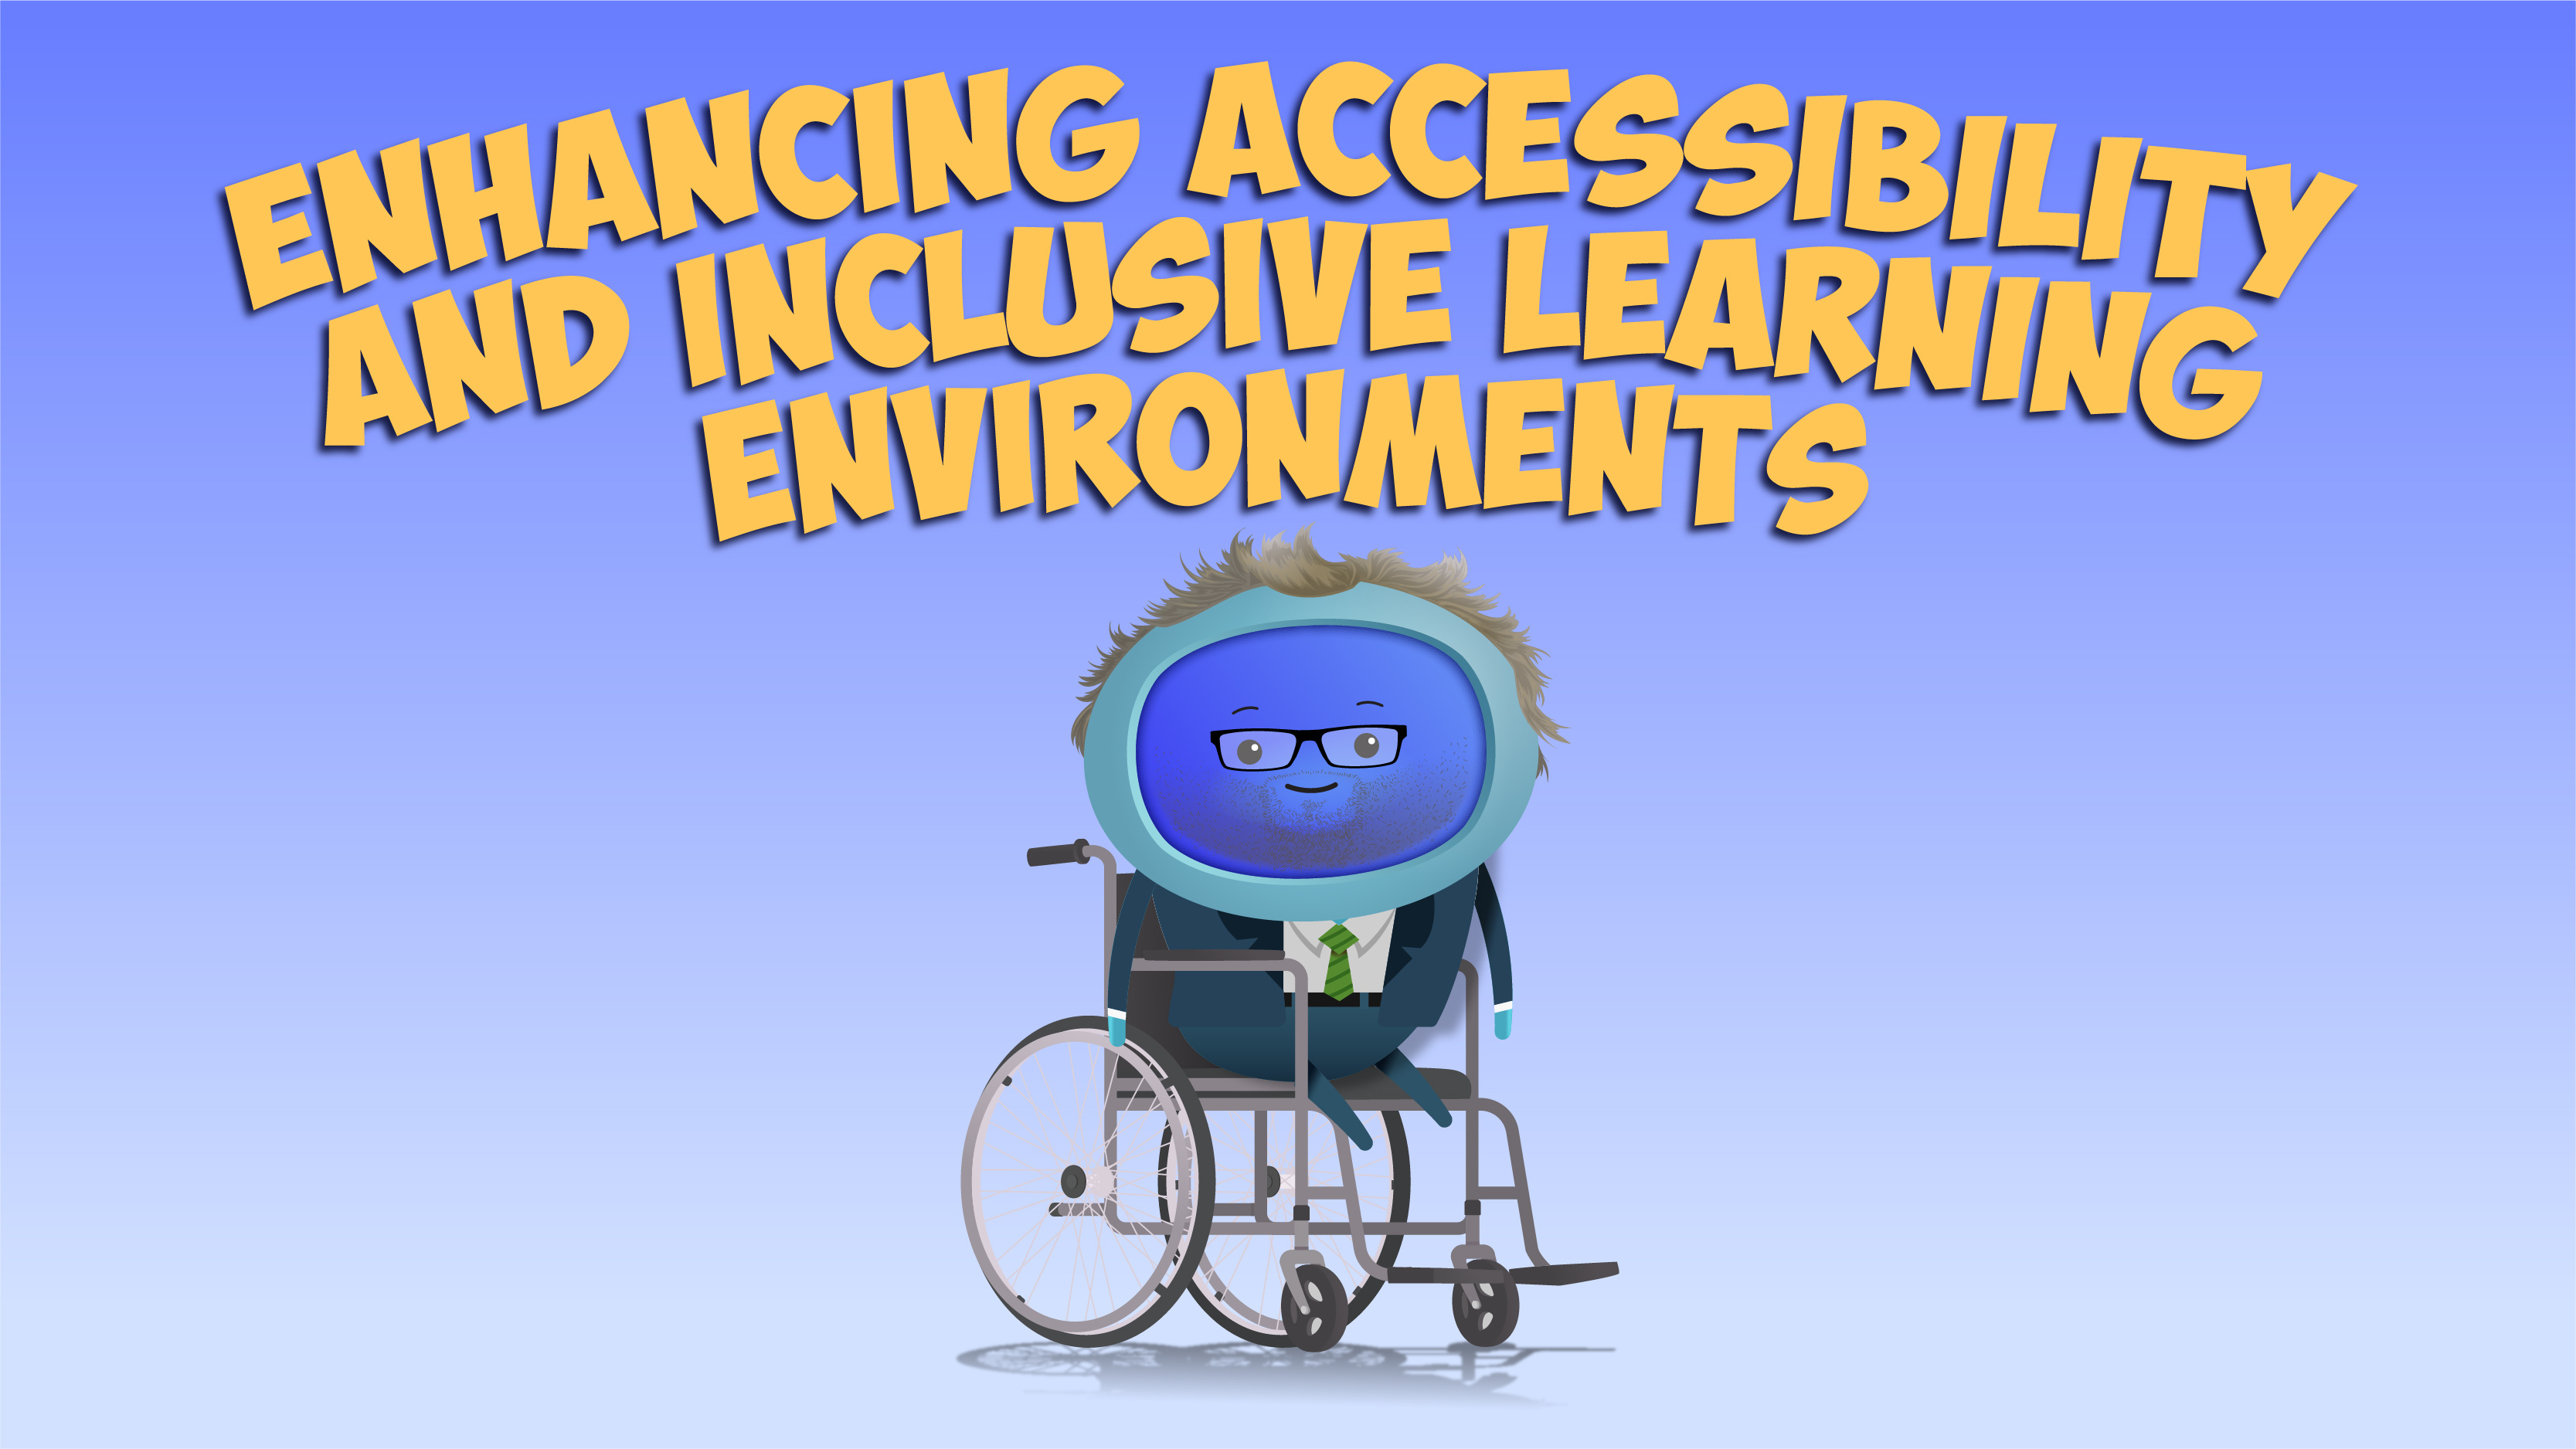 Enhancing Accessibility and Inclusive Learning Envrionments in UK Schools